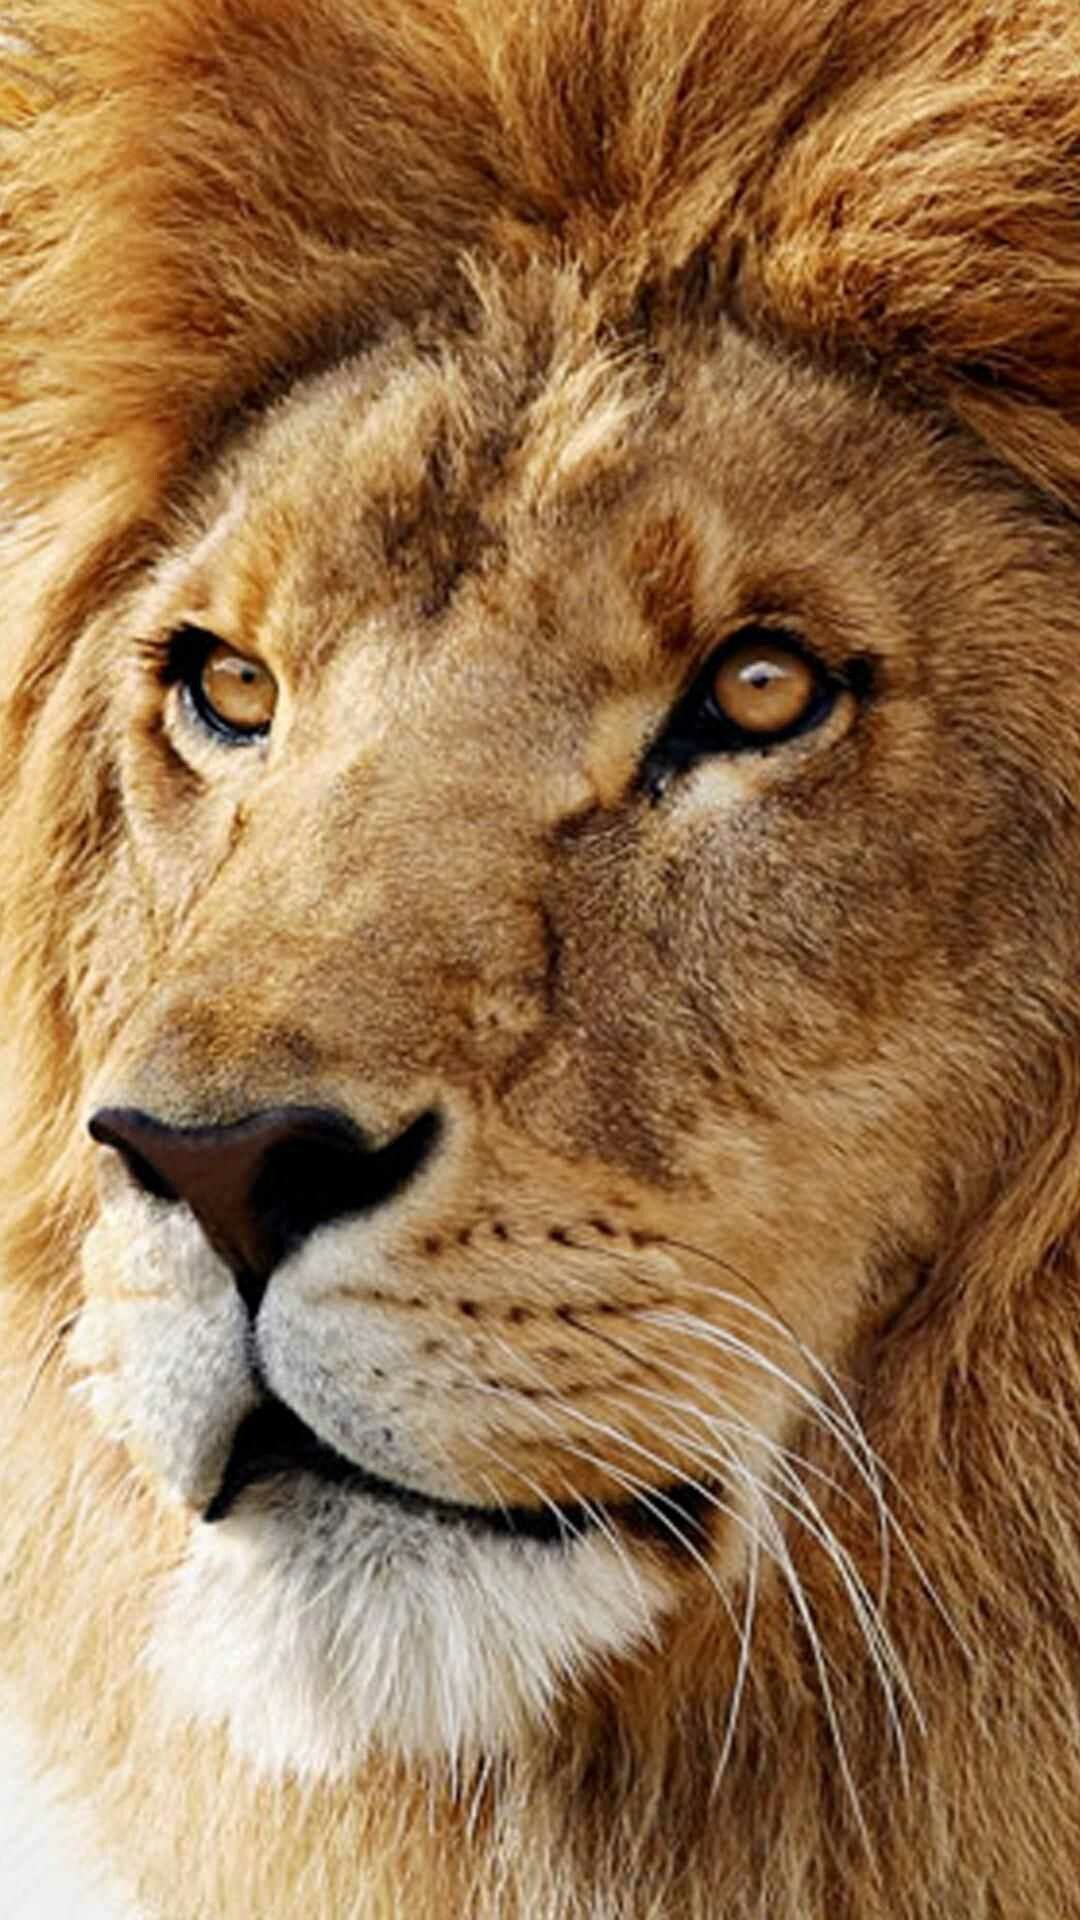 Lion: Their coats are yellow-gold, and adult males have shaggy manes that range in color from blond to reddish-brown to black. 1080x1920 Full HD Background.